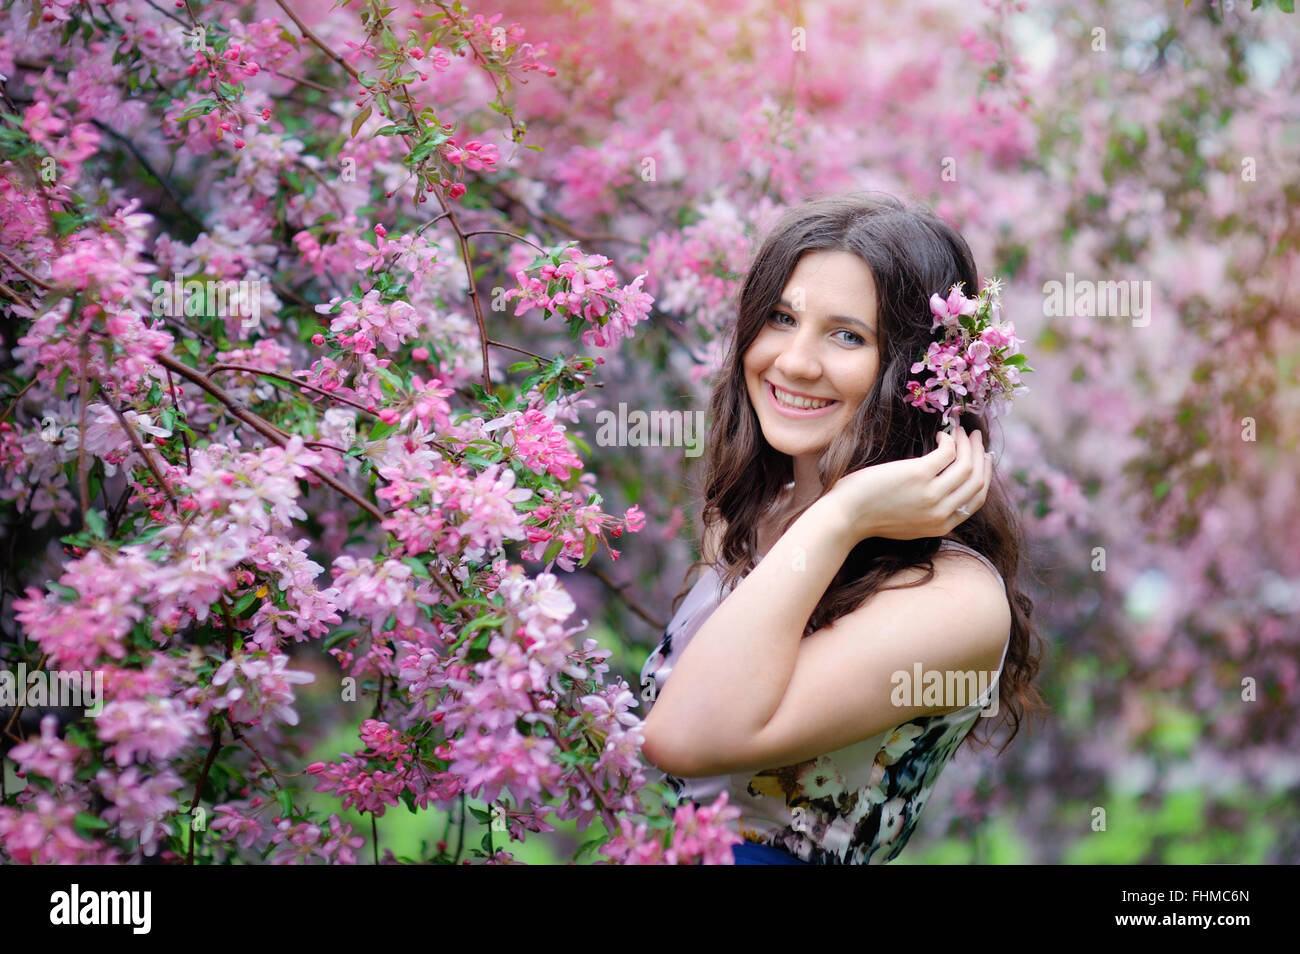 Beautiful girl in spring park with flowers lifestyle portrait, happy woman with blooming cherry tree. Skin care and beauty. Smiling teen girl in spring garden enjoying nature. Spring concept. Series. Stock Photo